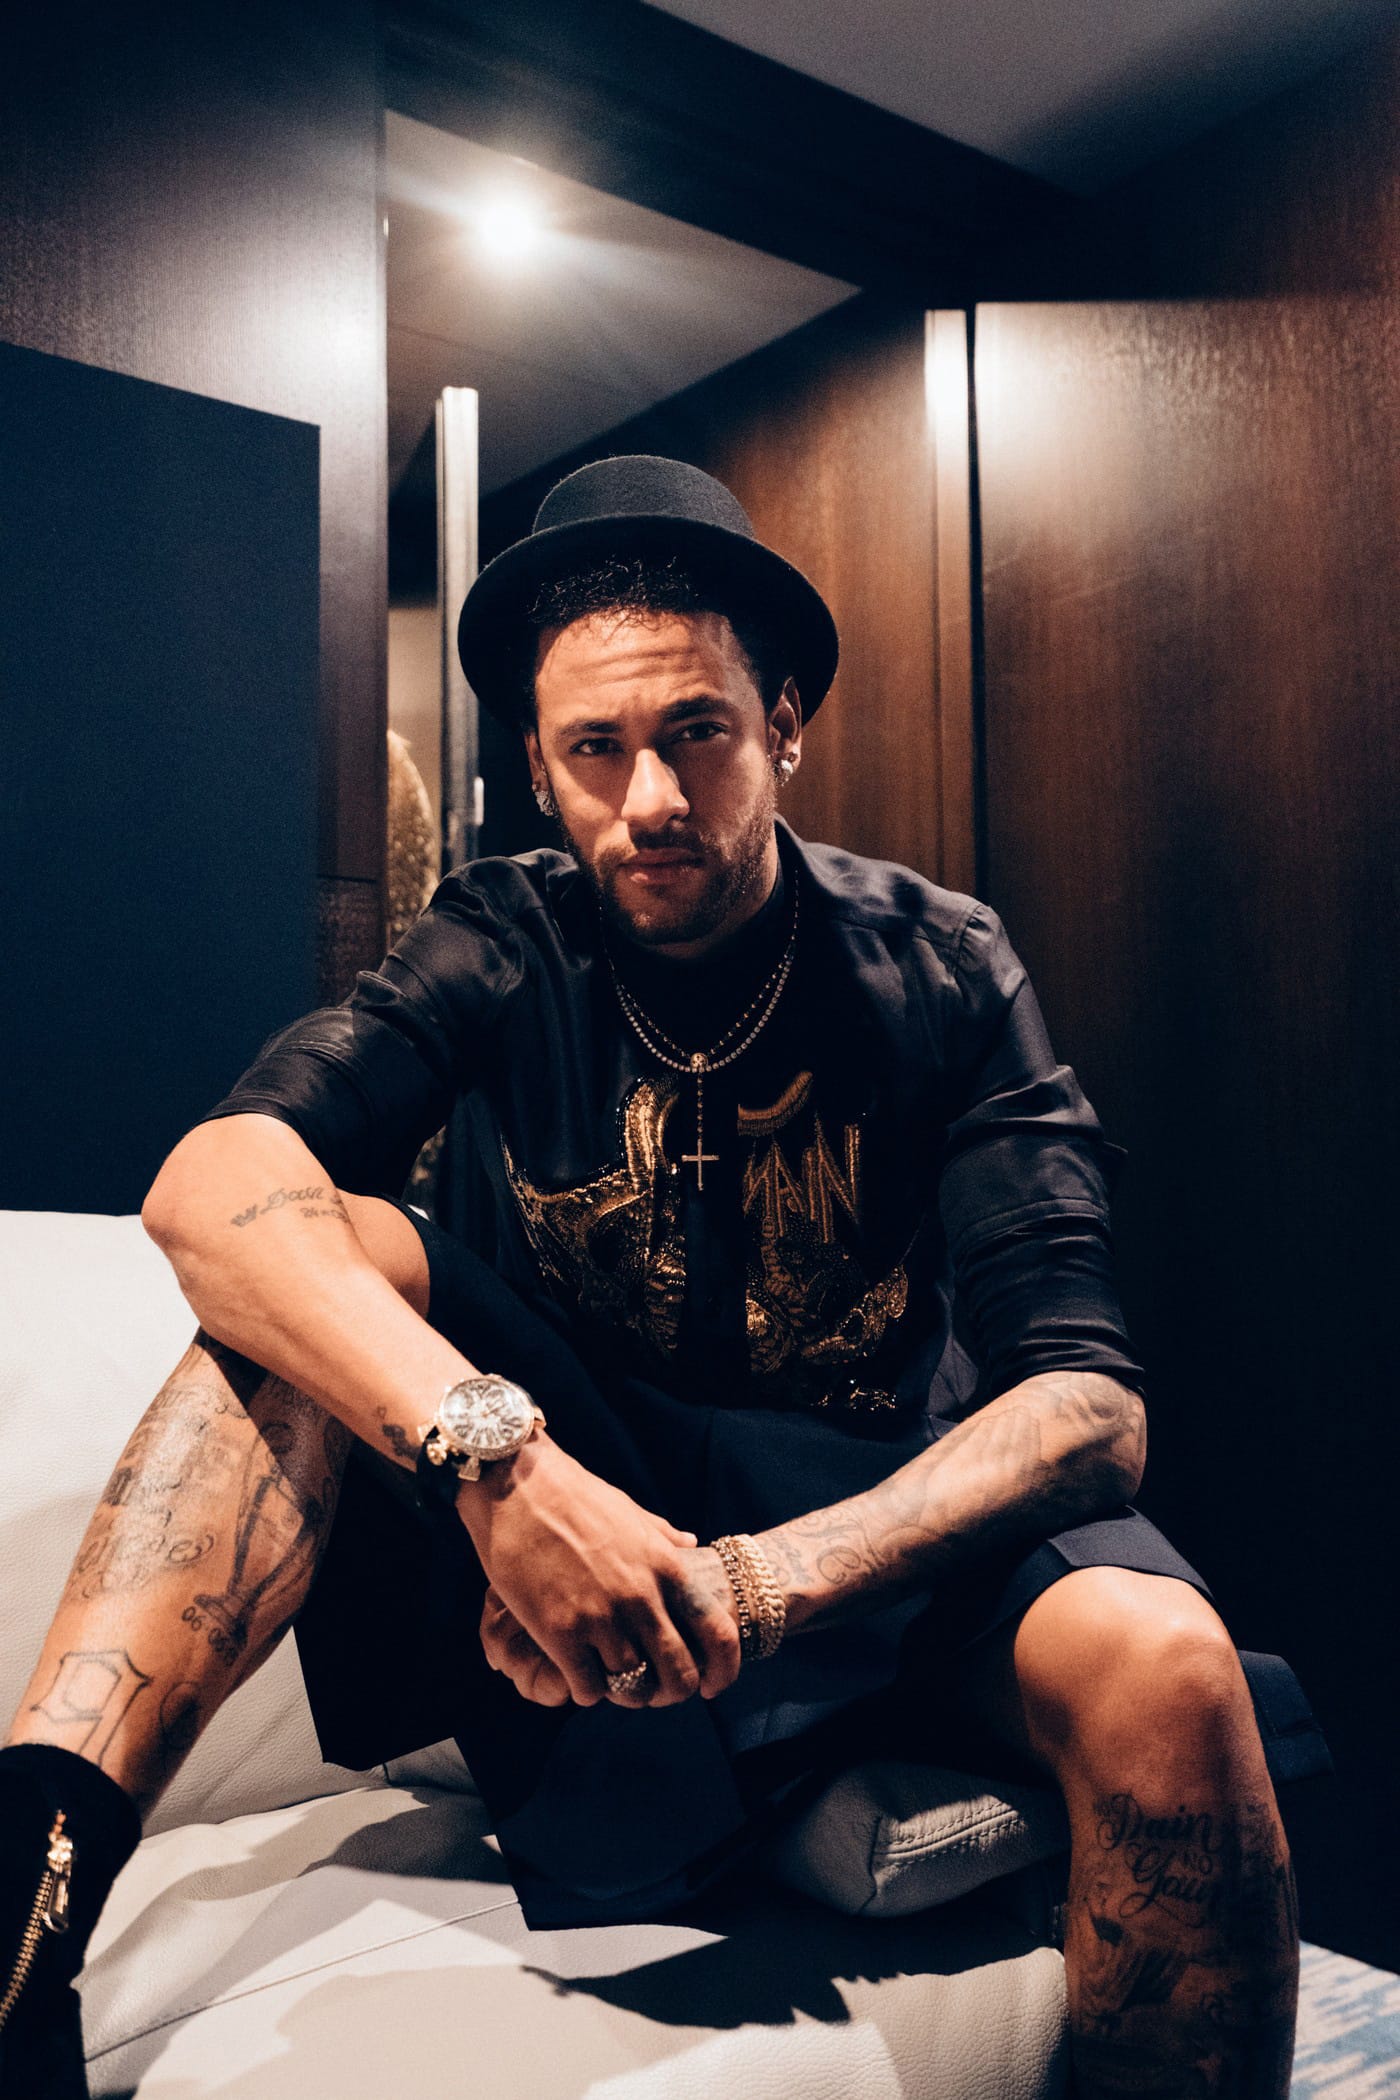 Twitter reacts as Neymar shows off new Batman and Spiderman tattoos